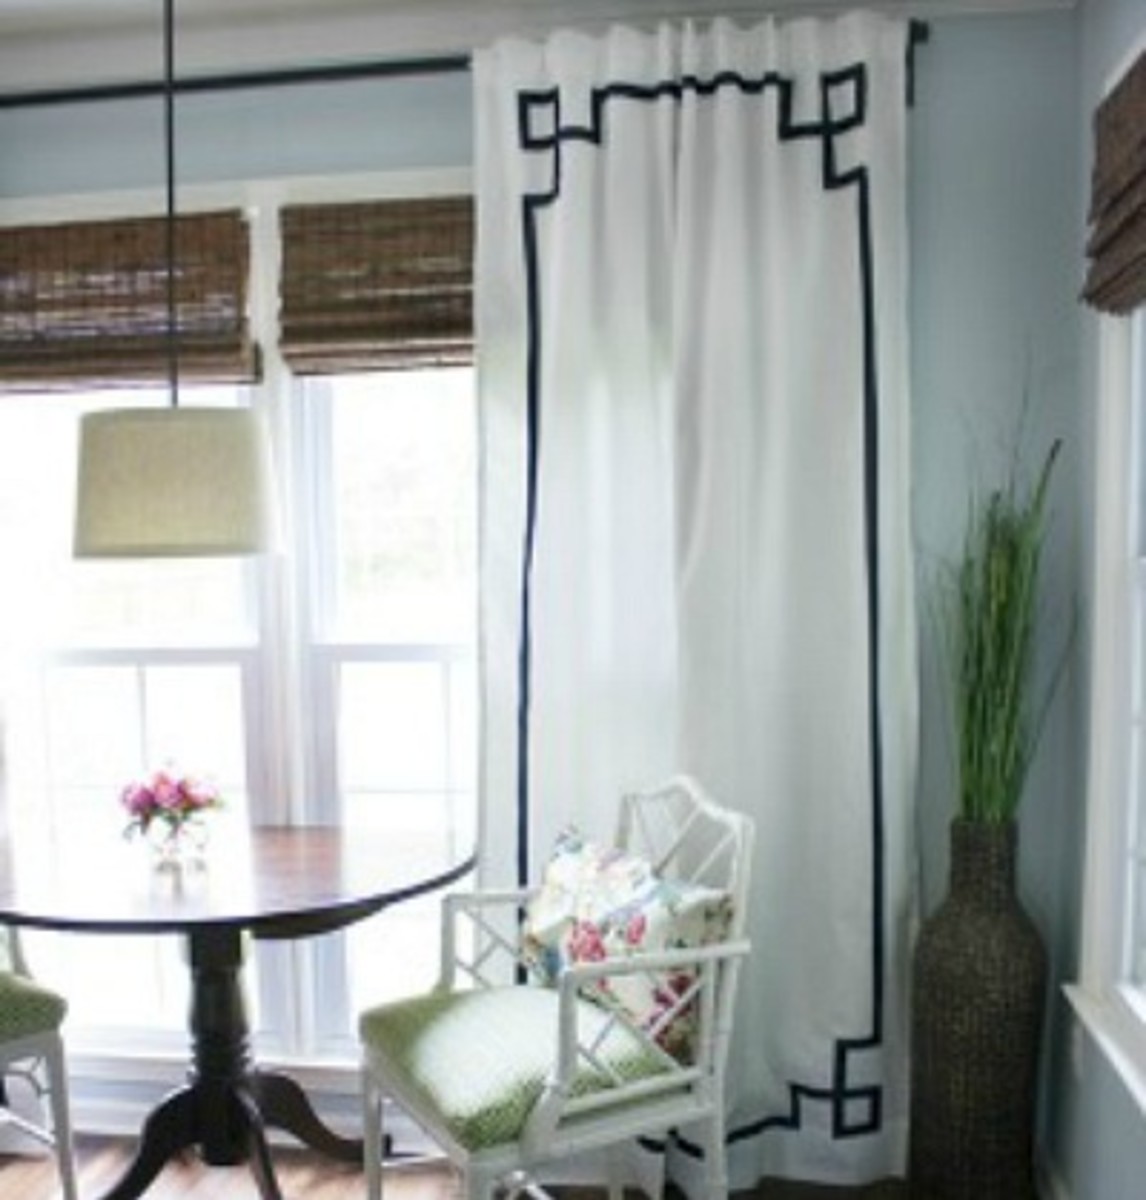 customize-purchased-curtains